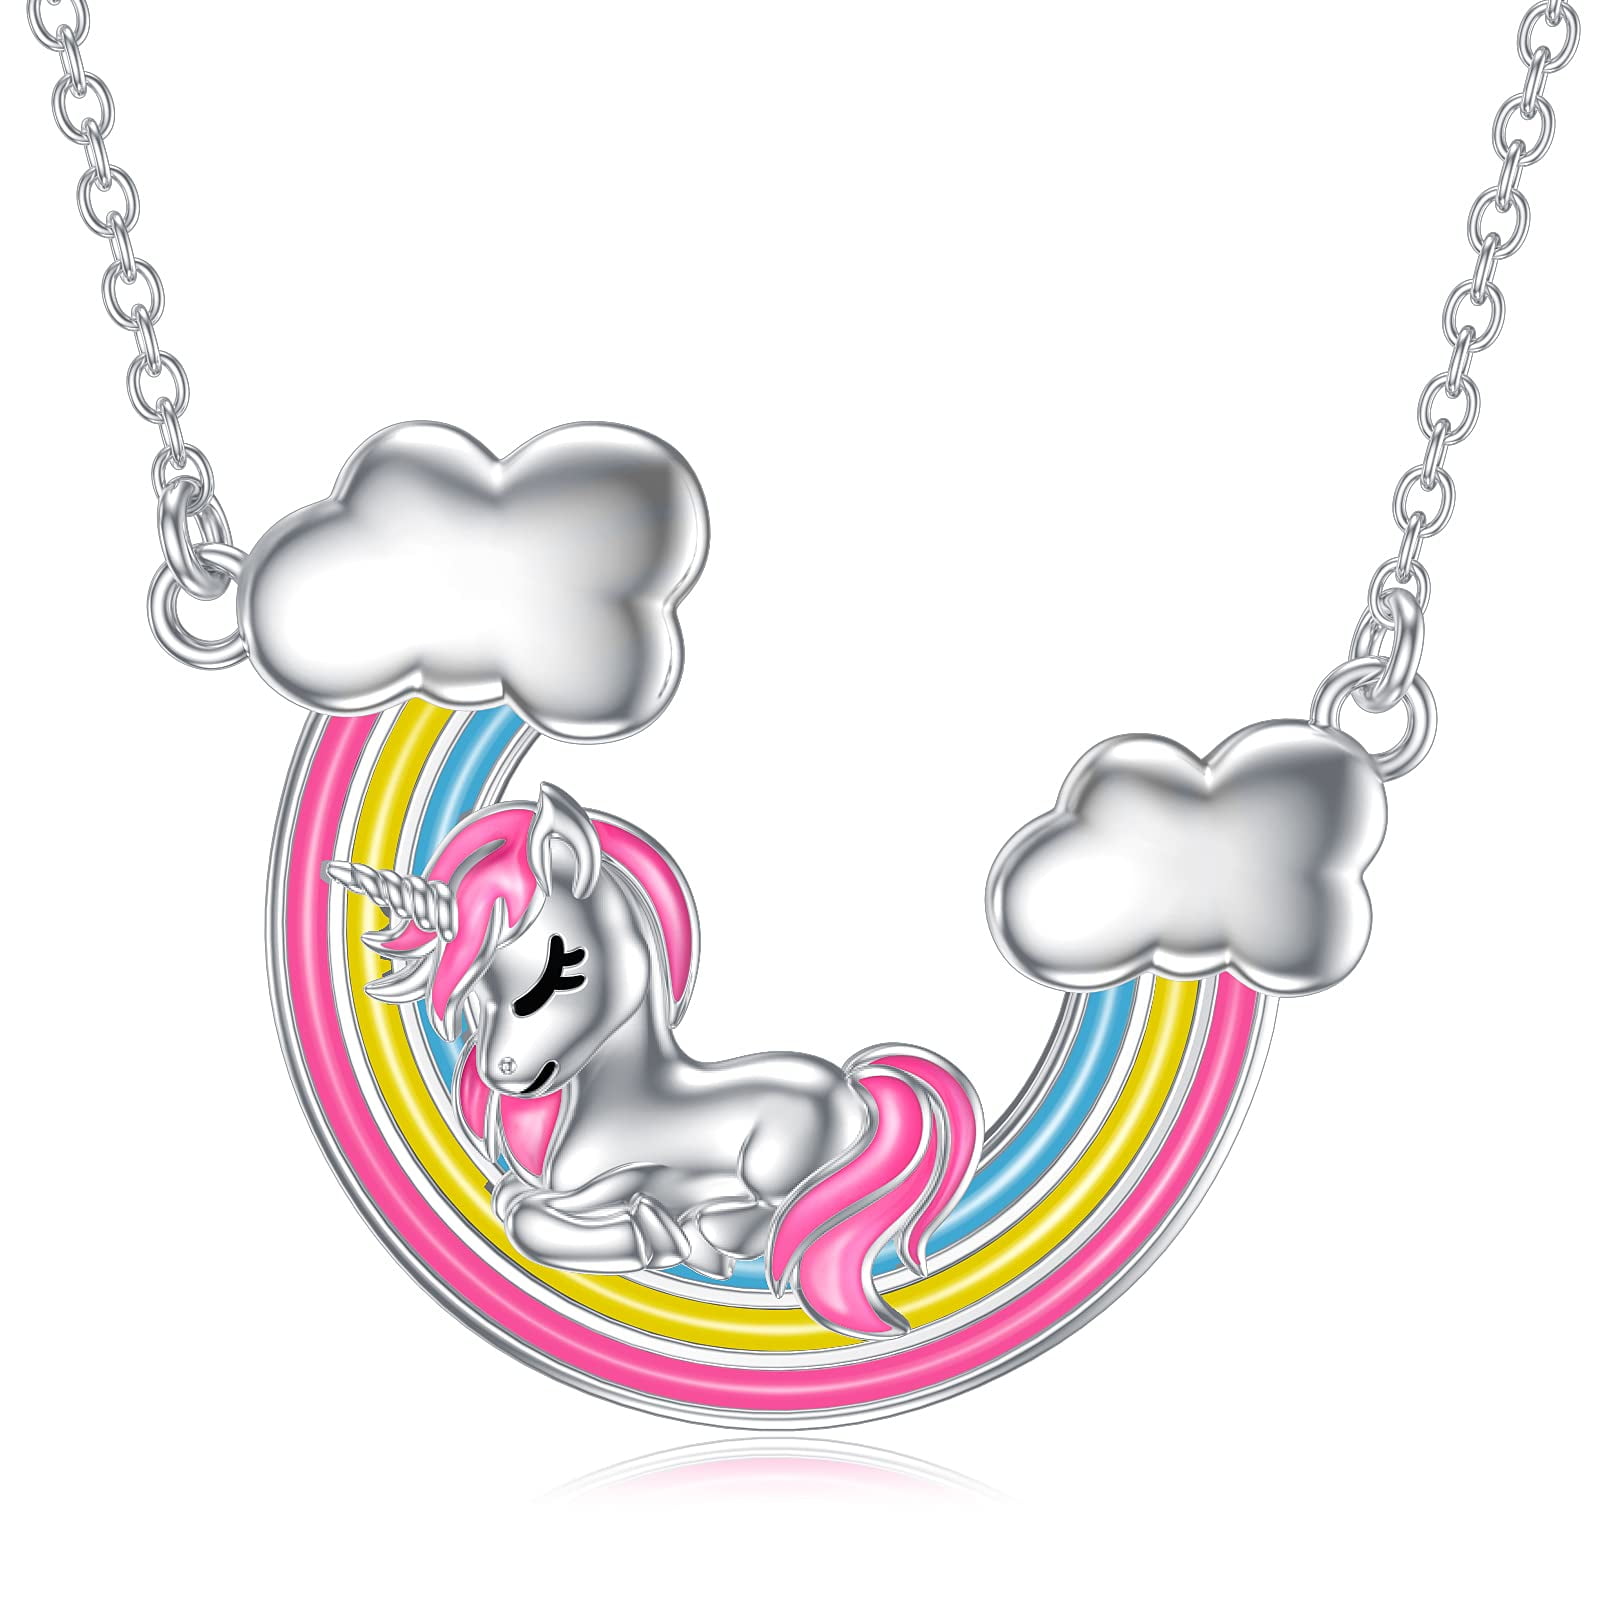 UNICORN HORSE PONY PENDENT SILVER NECKLACE 18 INCH  GIFT BOX BIRTHDAY PARTY 